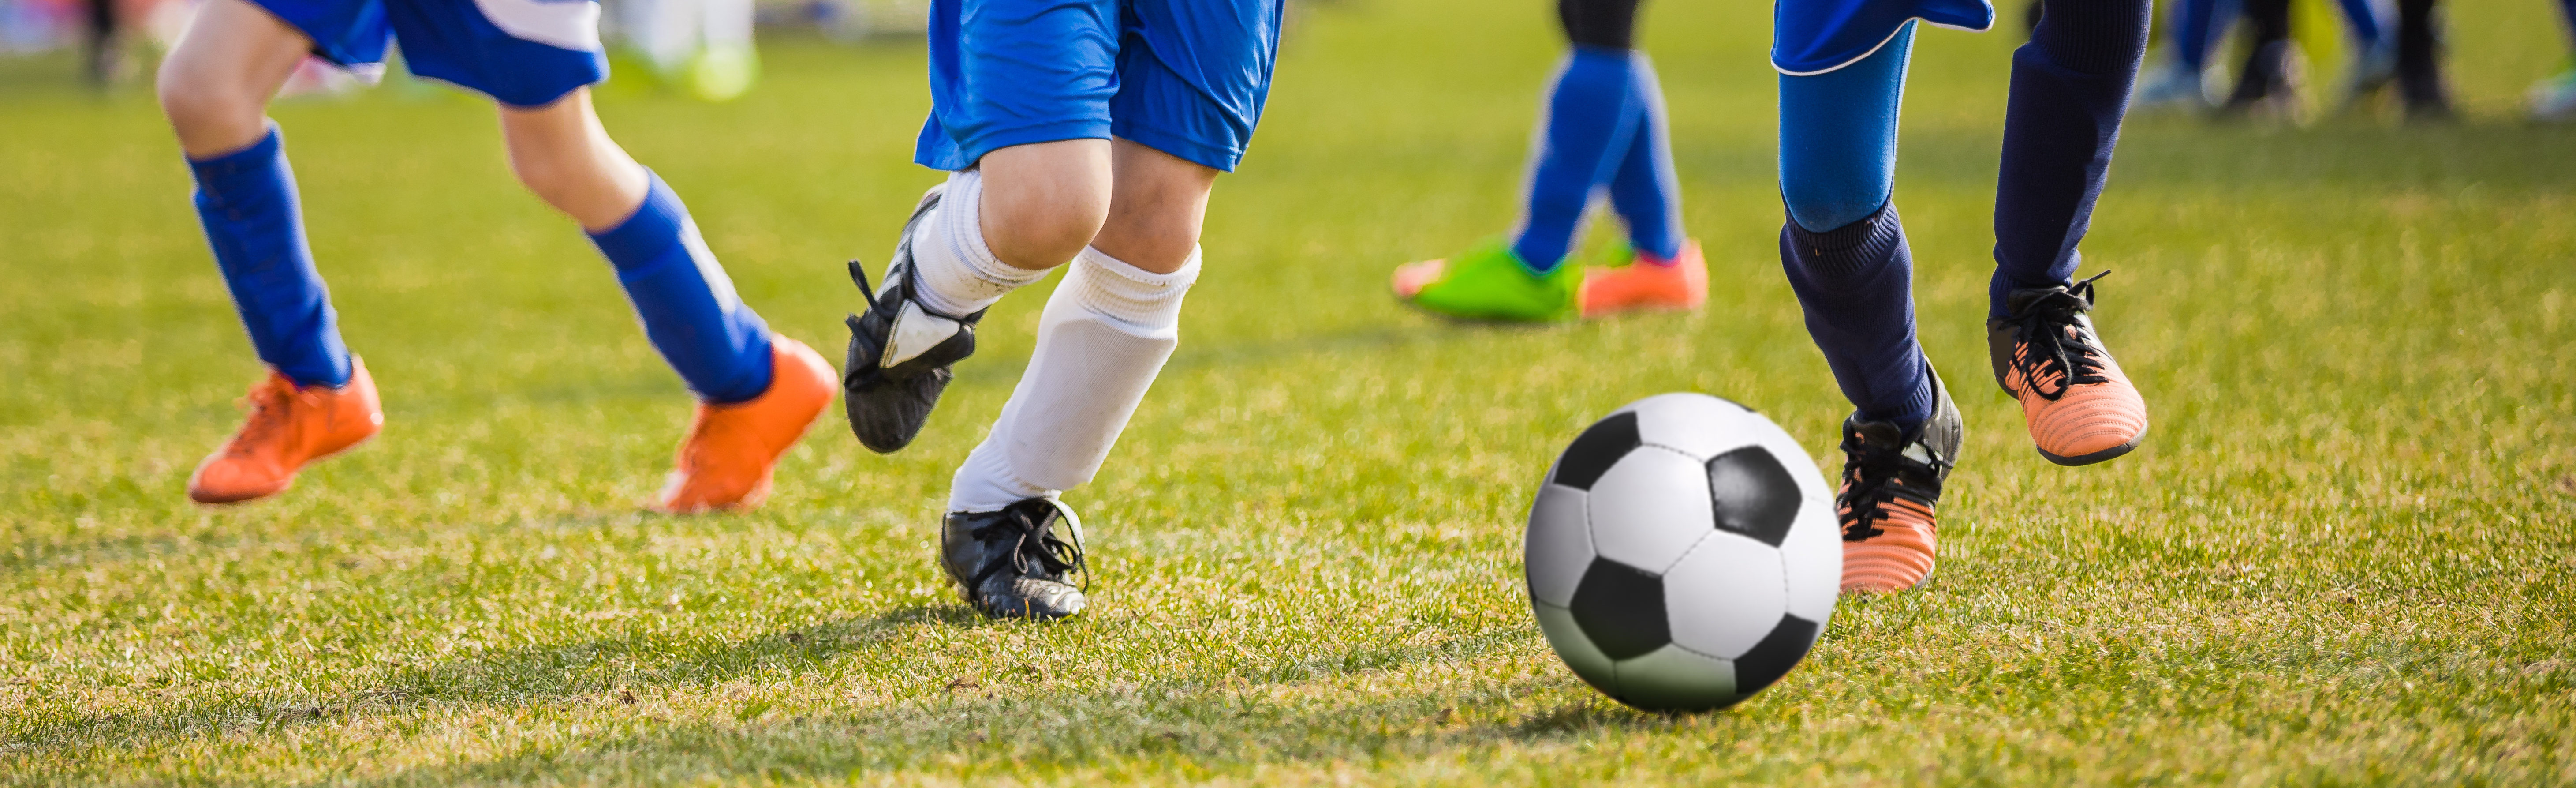 How to File a Civil Lawsuit for Emotional and Sexual Abuse in Youth Sports